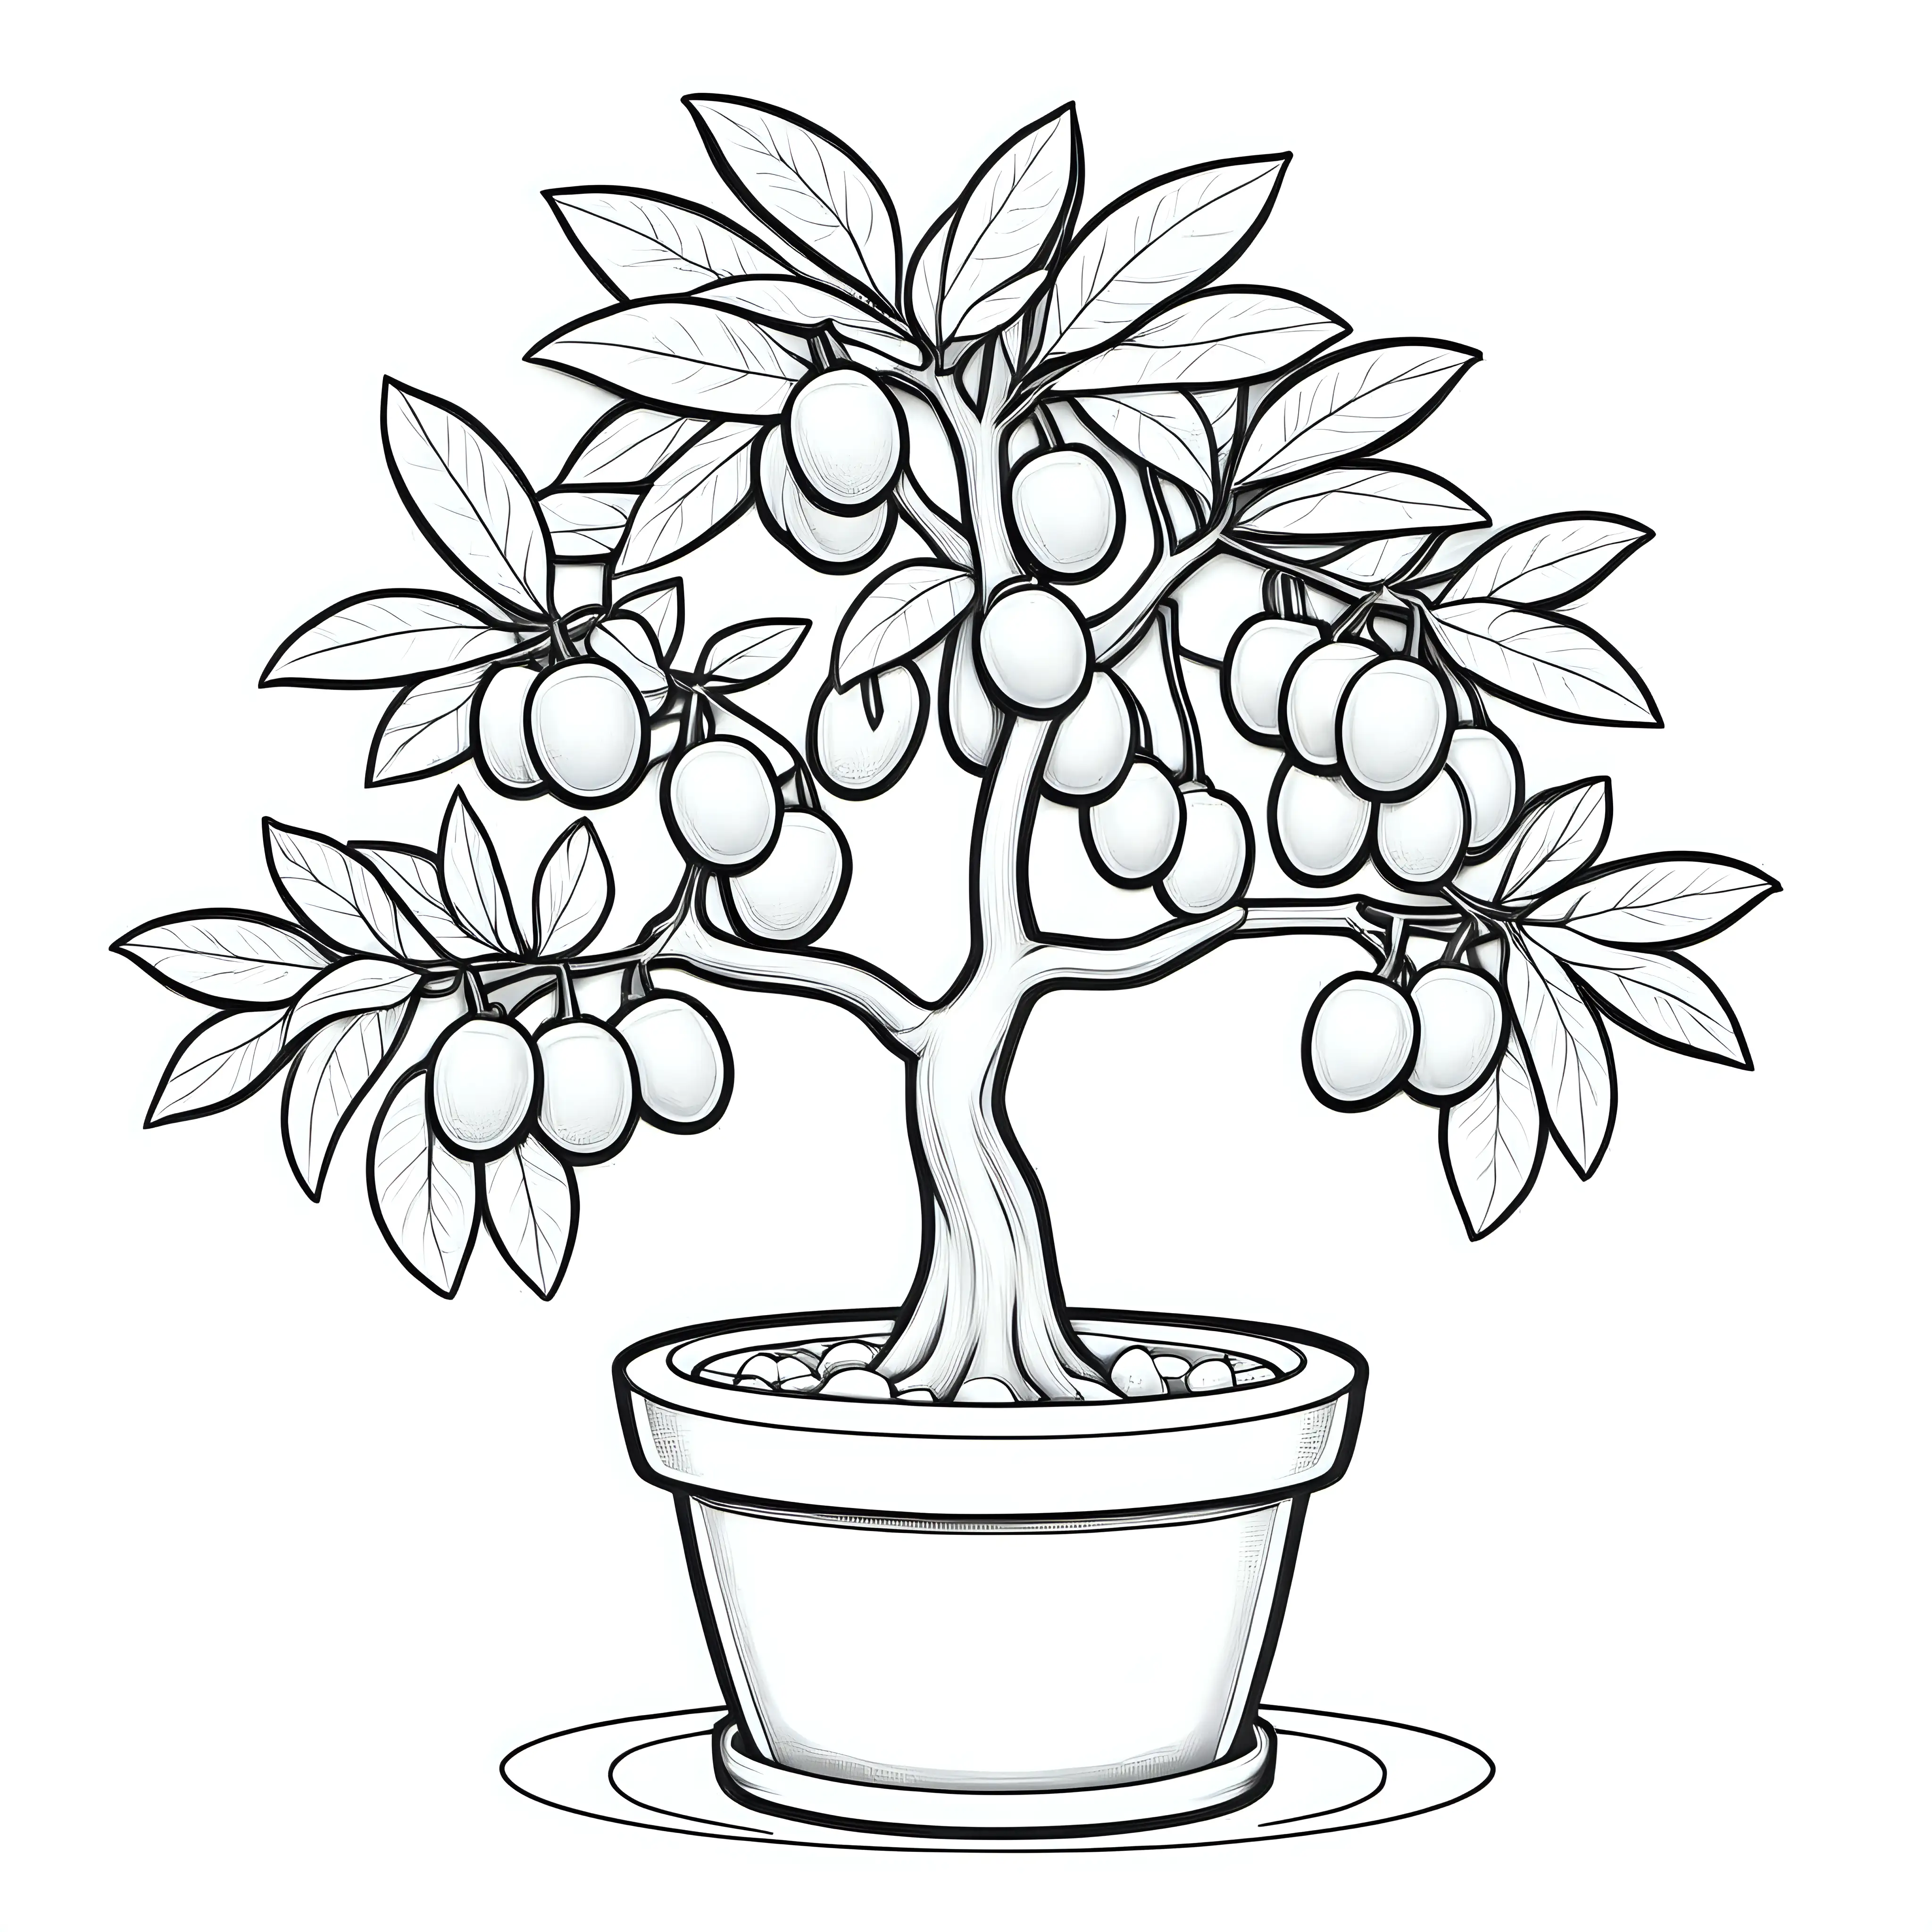 Lunar New Year Coloring Page with Cartoon Kumquat Tree